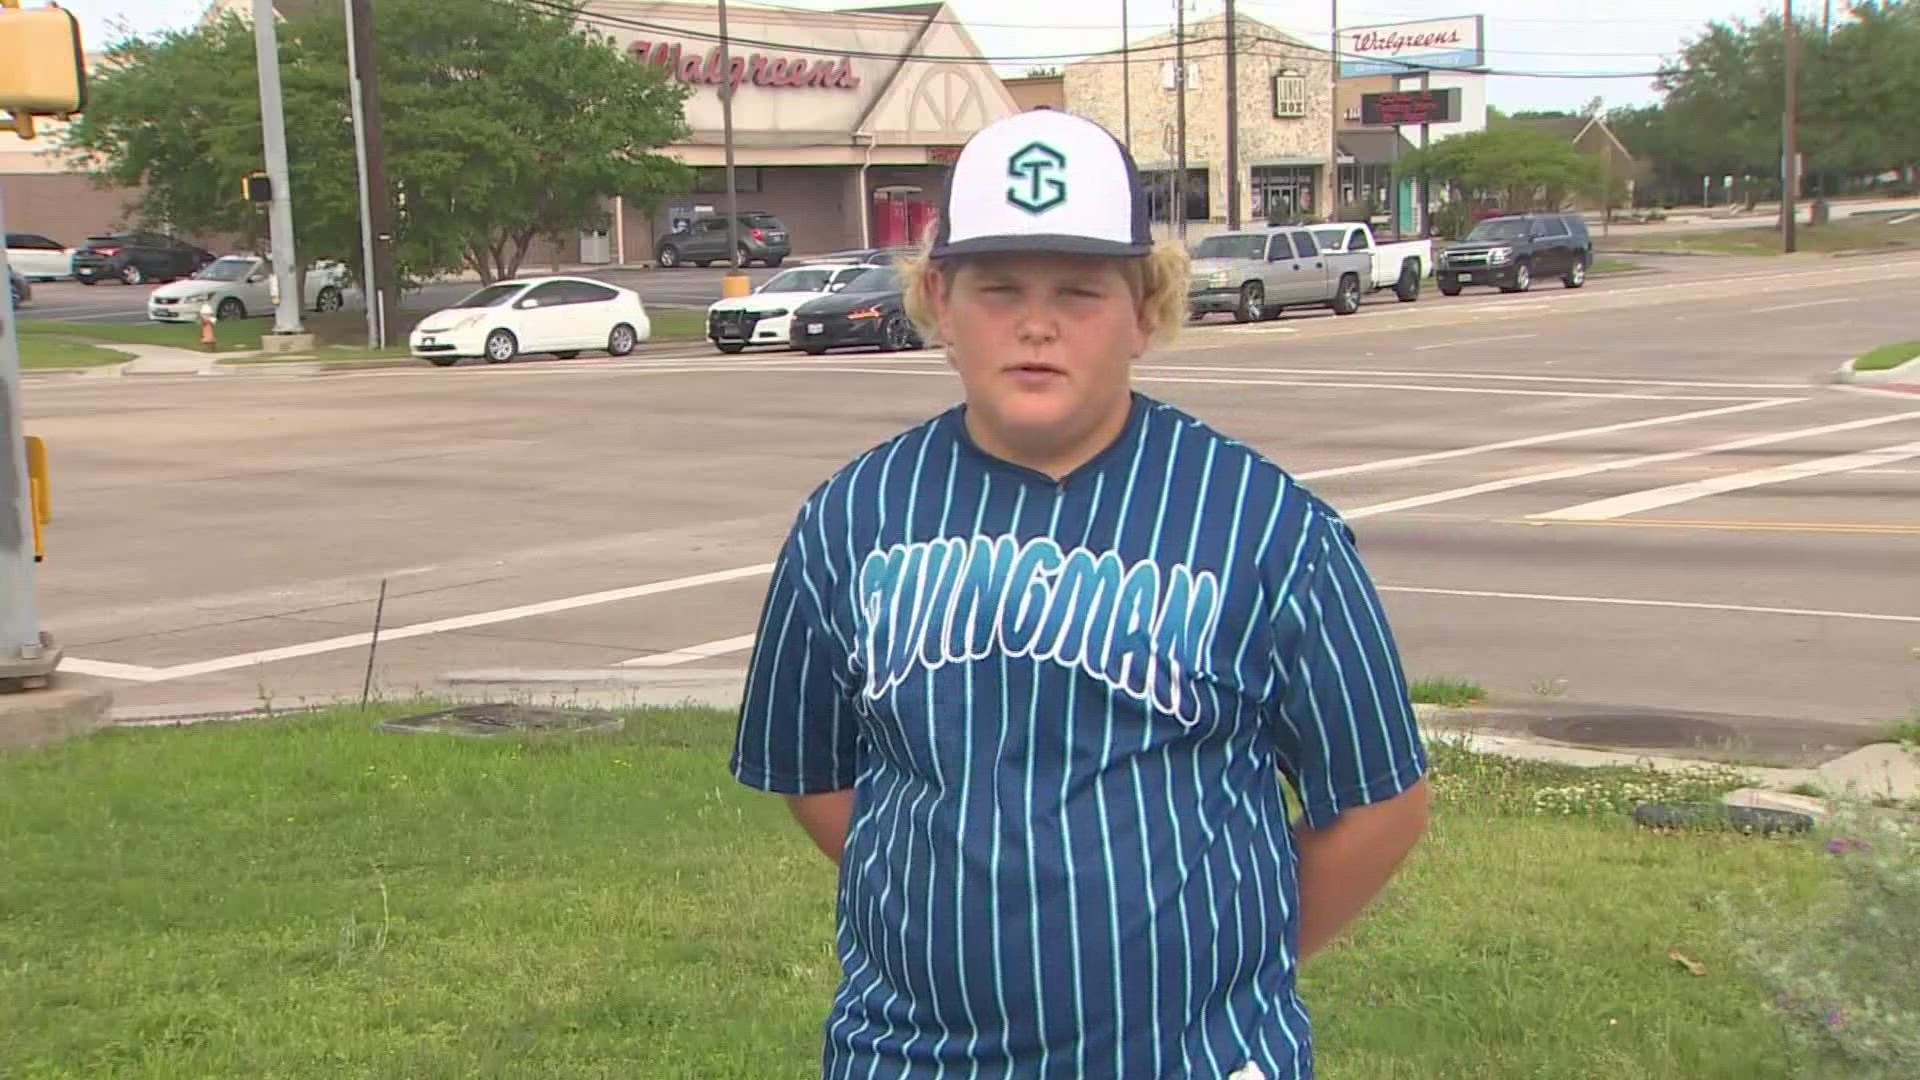 The community showed support for Grady Ferranti, who was selling tamales and water to raise money so he can go to two summer baseball tournaments.